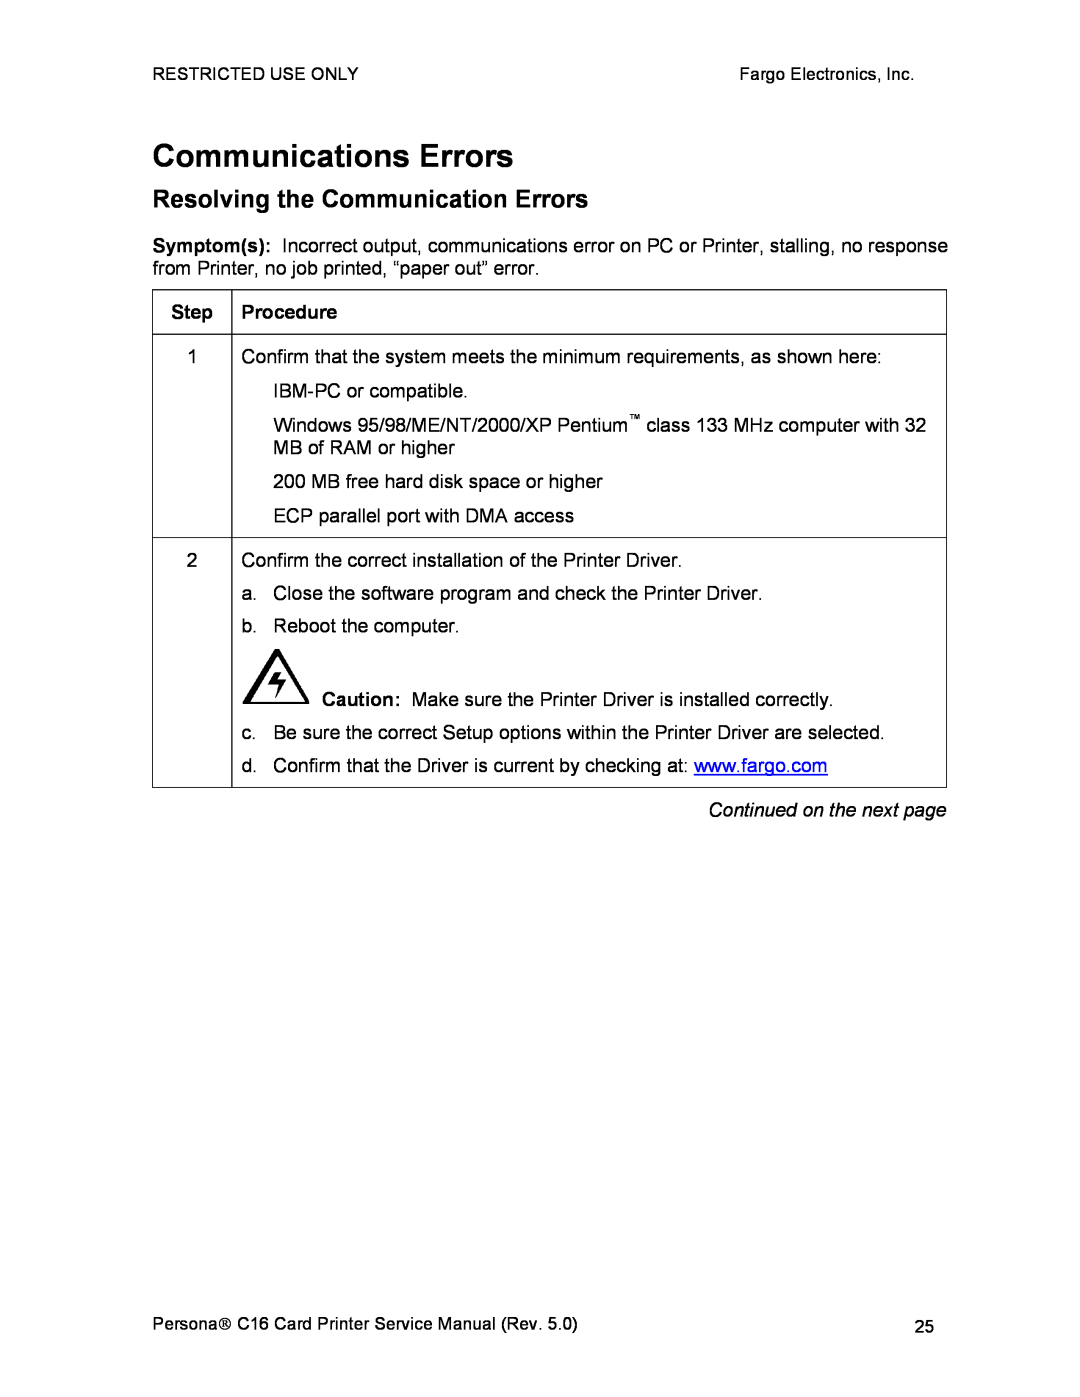 FARGO electronic C16 service manual Communications Errors, Resolving the Communication Errors, Continued on the next page 